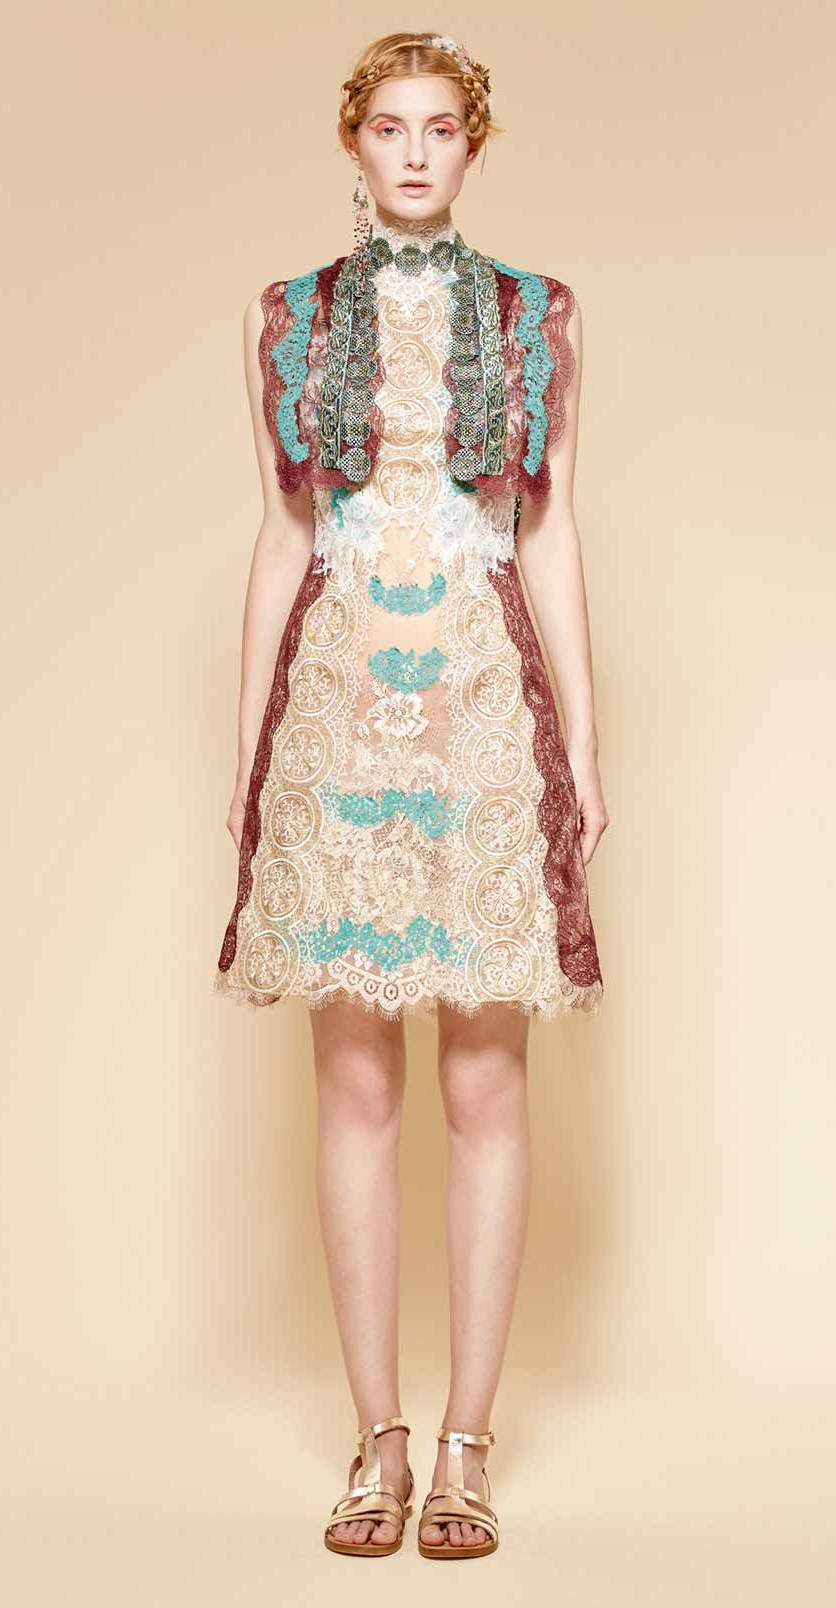 Short lace dress made of burgundy, nude, and aqua green